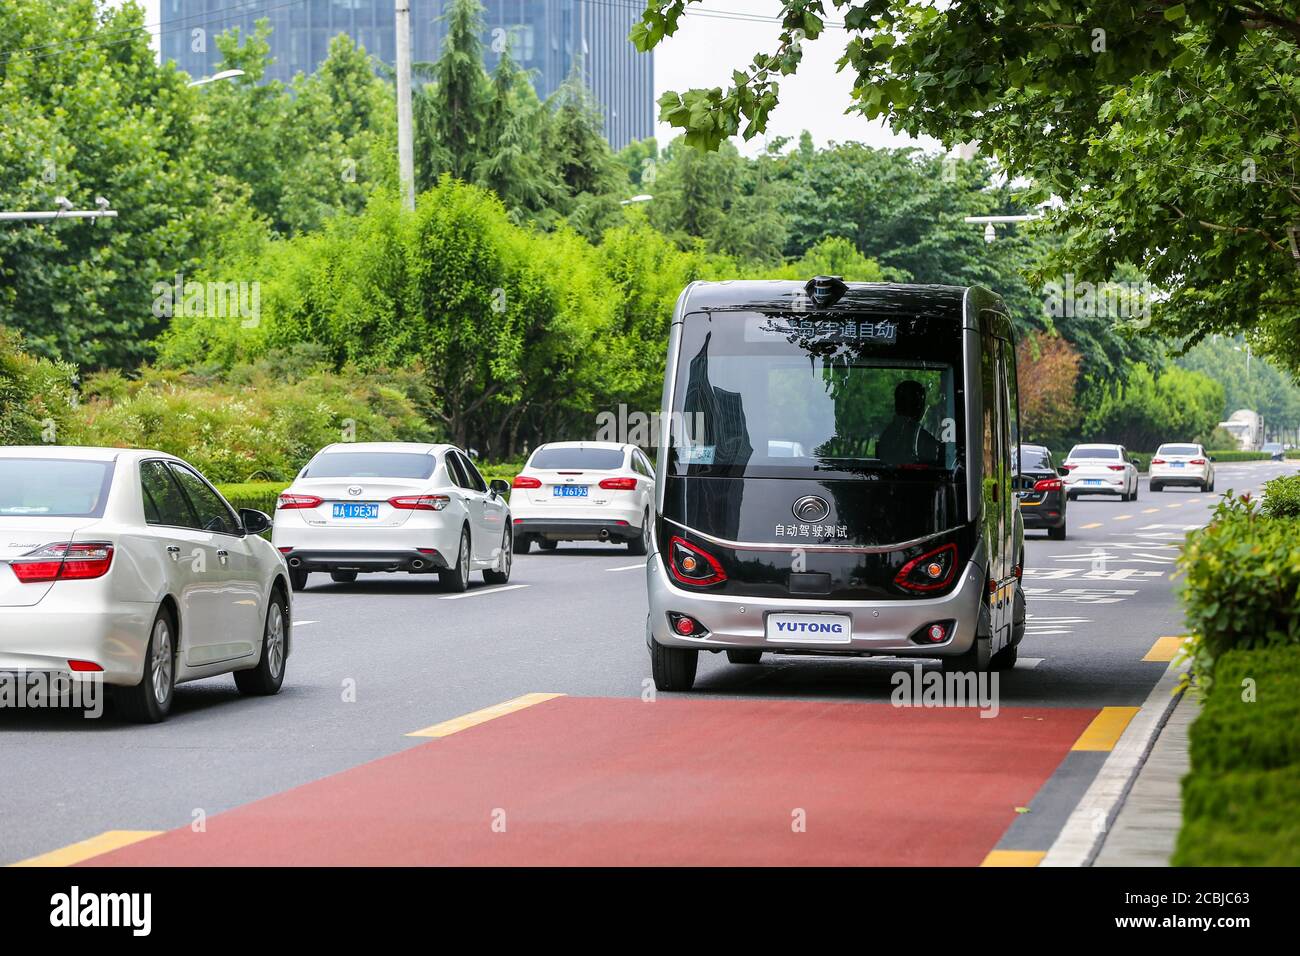 Zhengzhou, Zhengzhou, China. 14th Aug, 2020. HenanÃ¯Â¼Å'CHINA-On August 11, 2020, henan zhengzhou, zhengdong new district give wisdom island lake loop, yutong automated driving bus has run for a year, which is based on 5 g of L4 automated driving bus have highly intelligent, driven and autonomous obstacle avoidance, patrol intersection peers such as task can be accurate, complete, can also identify ambulances, fire engines, etc and take the initiative to give way.''Smart car   smart road   ubiquitous cloud'' is bringing great changes to zhengzhou citizens' travel. Despite being in operation Stock Photo